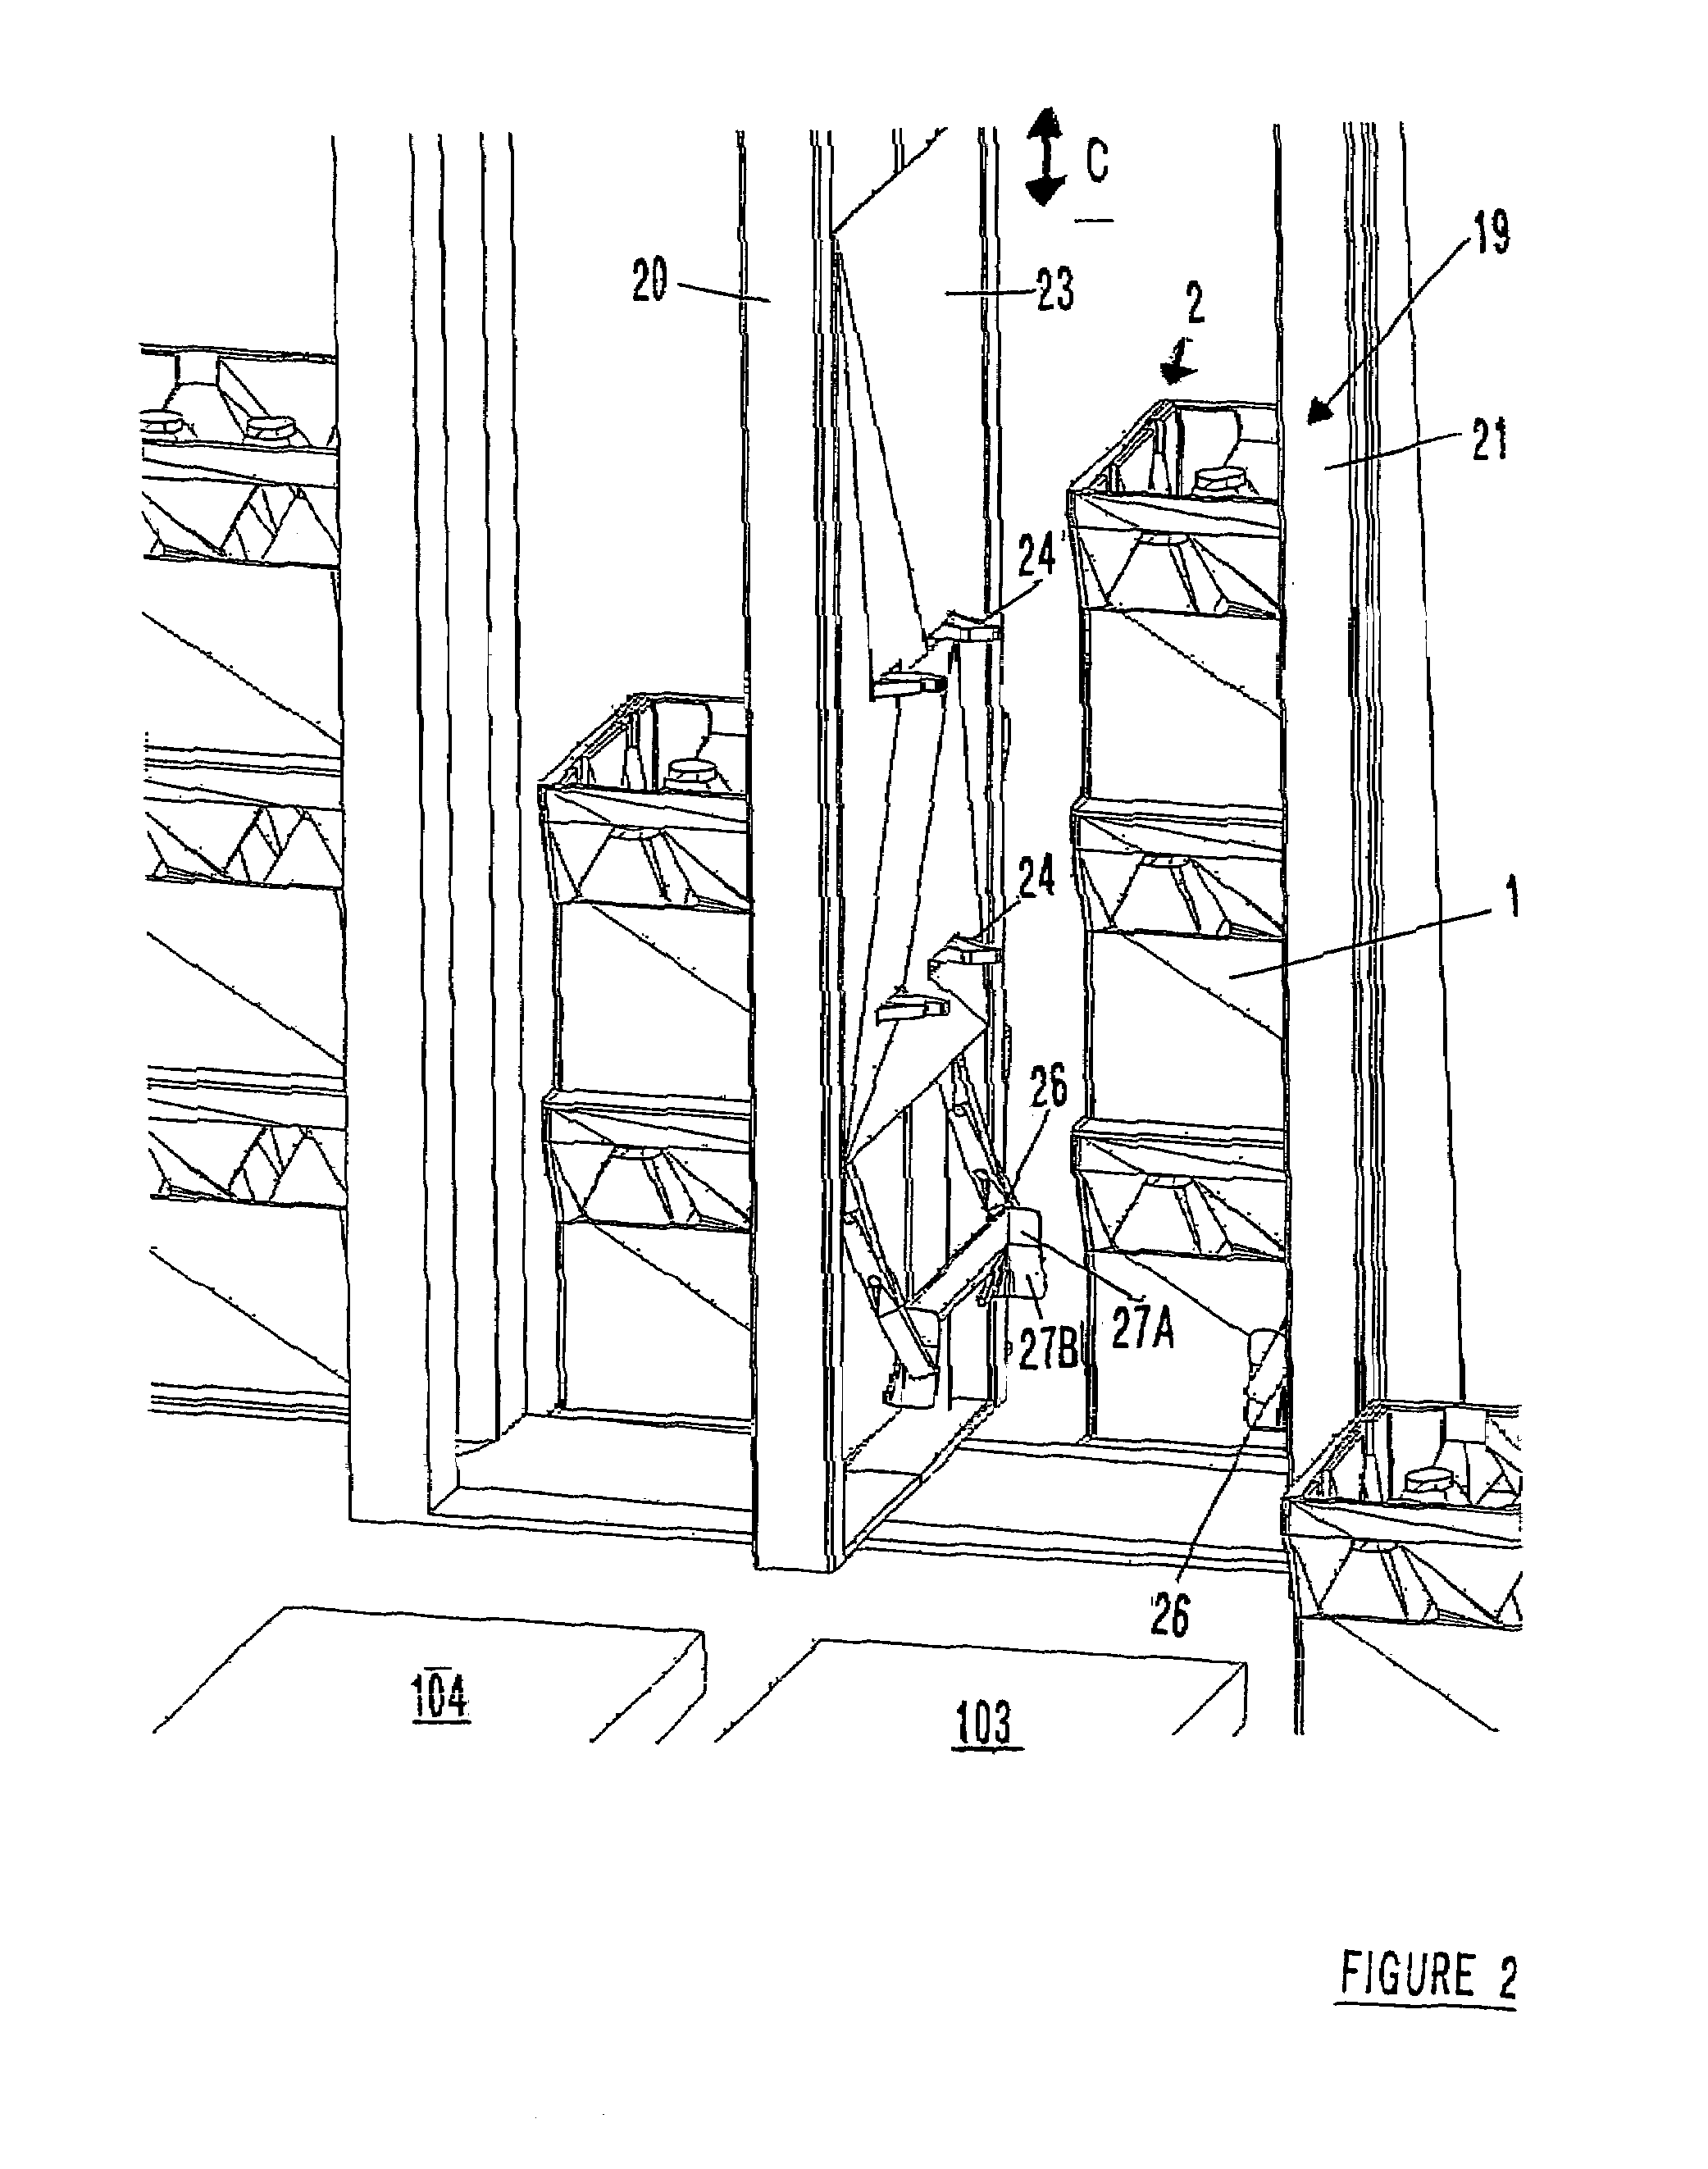 Apparatus for transporting containers